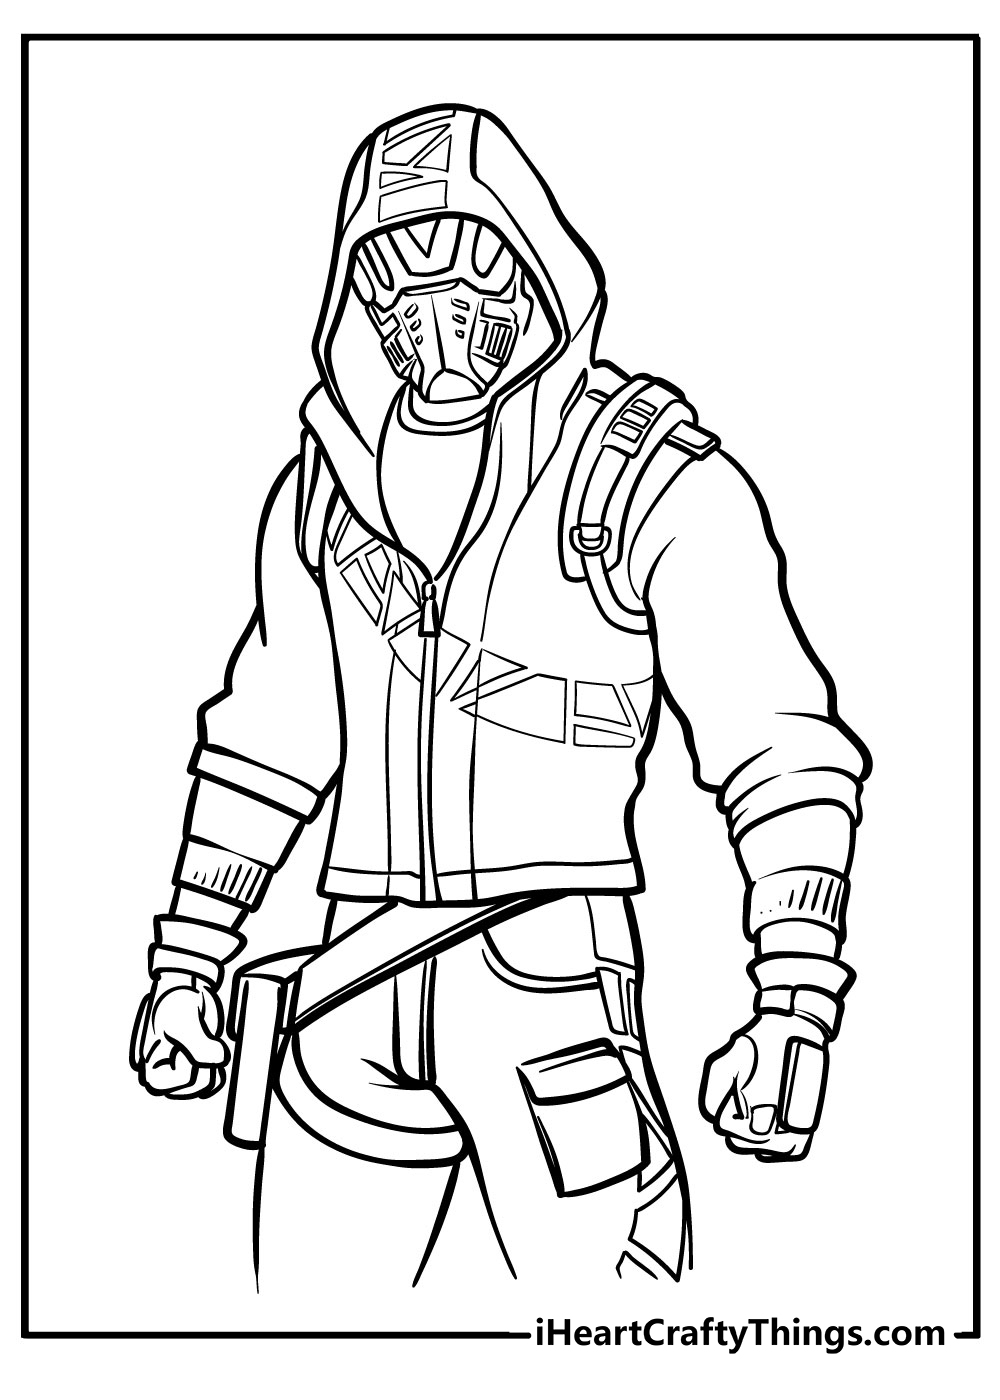 Fortnite Coloring Pages free printable for kids